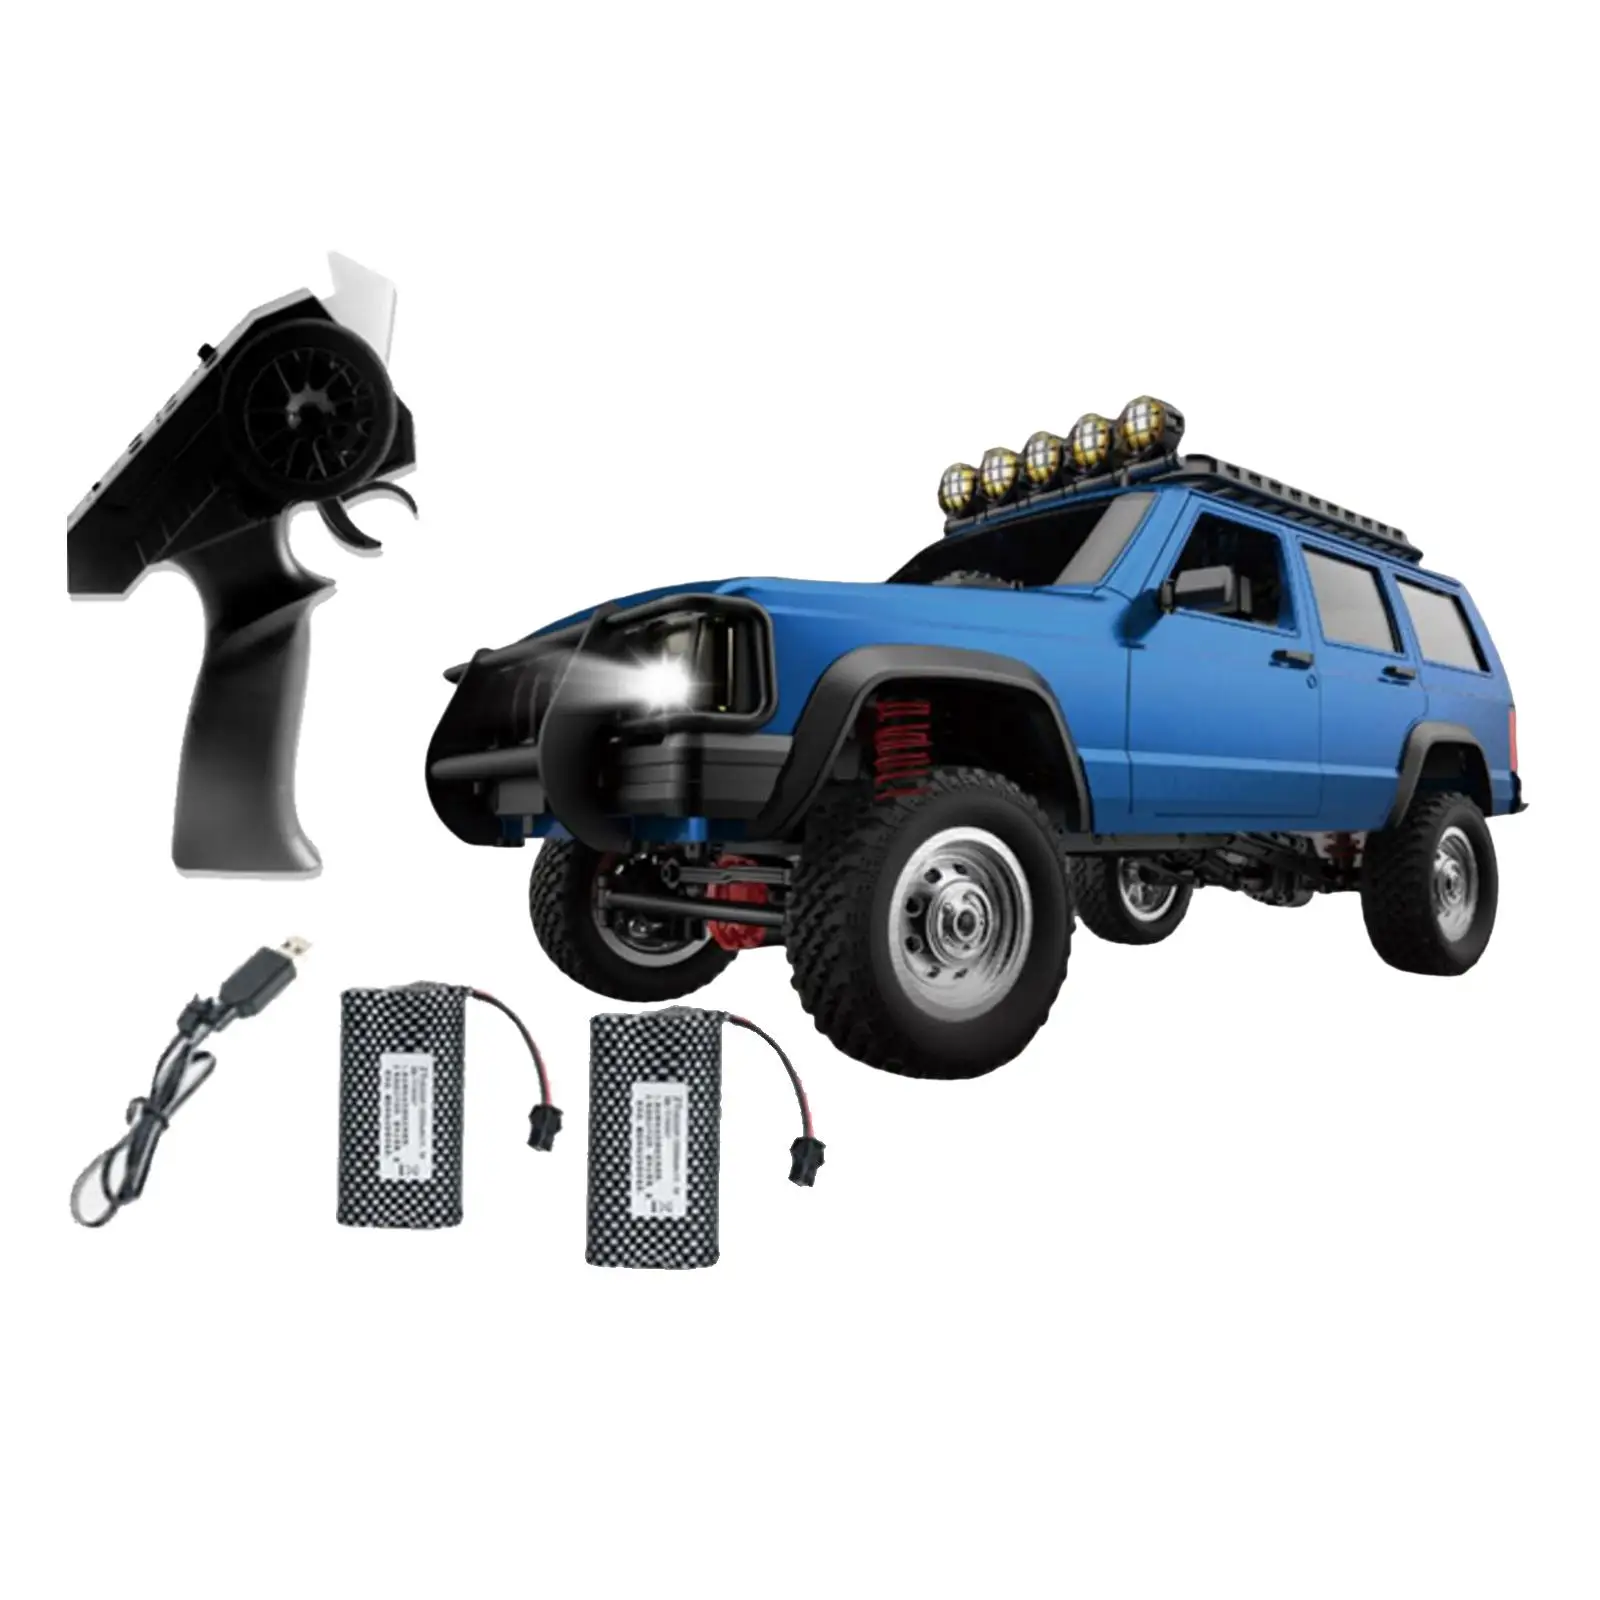 4WD 1:12 RC Car Rechargeable Battery LED Headlight Trucks Remote Control Rock Crawler 2.4G for Children Adult Boys Kids